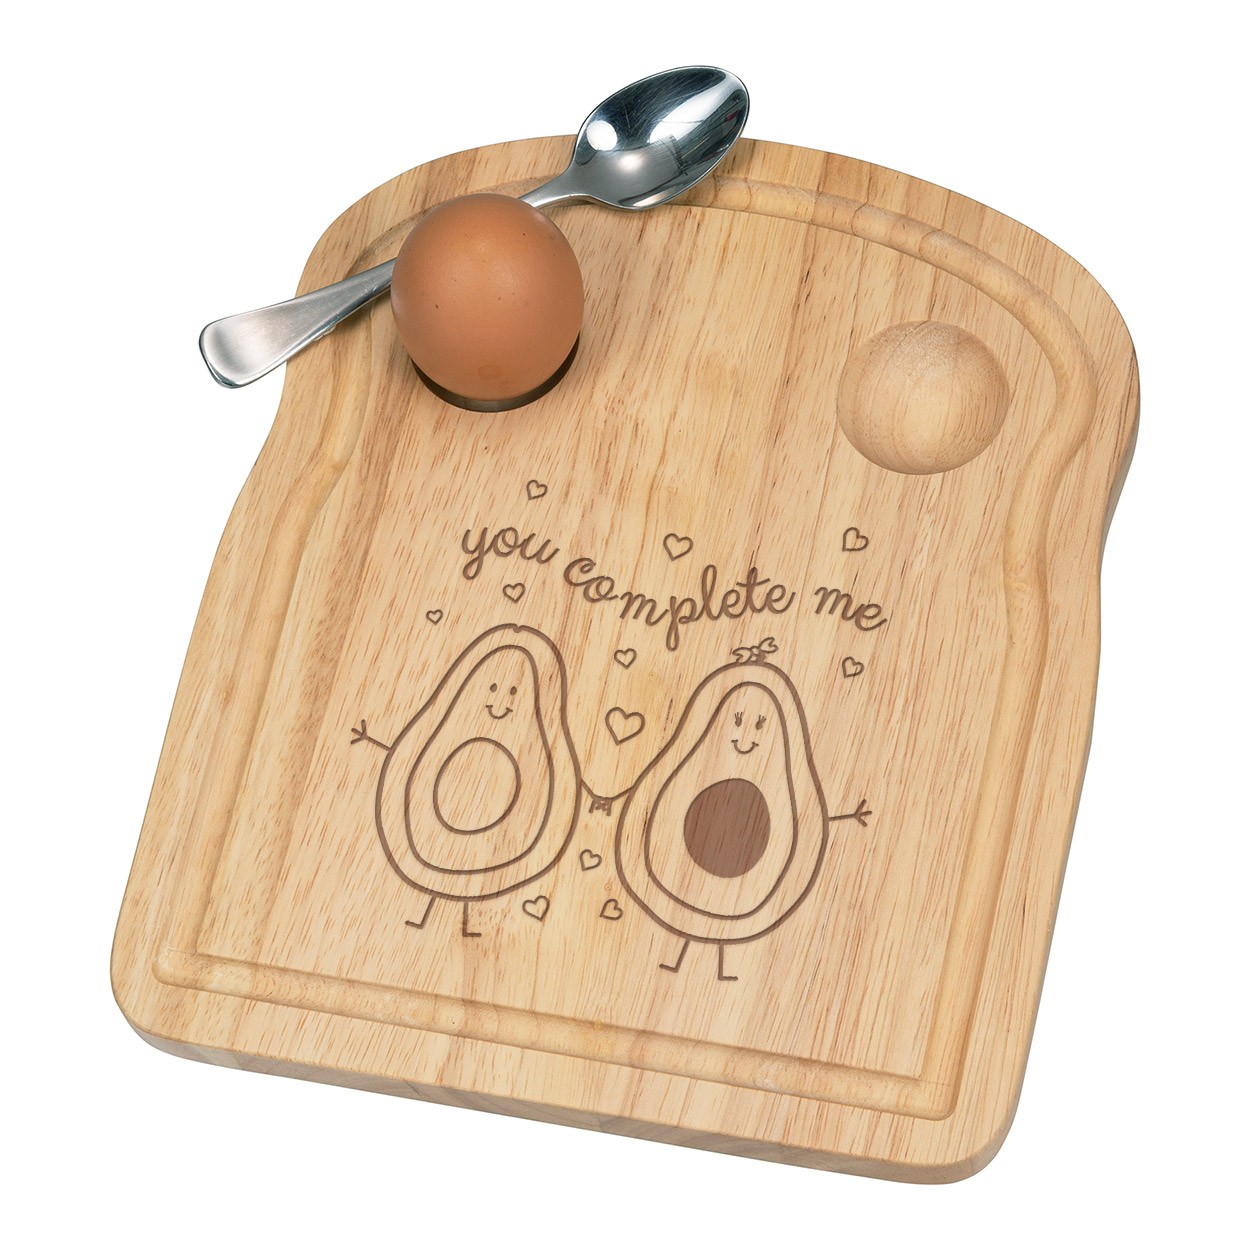 Avocado You Complete Me Breakfast Dippy Egg Cup Board Wooden